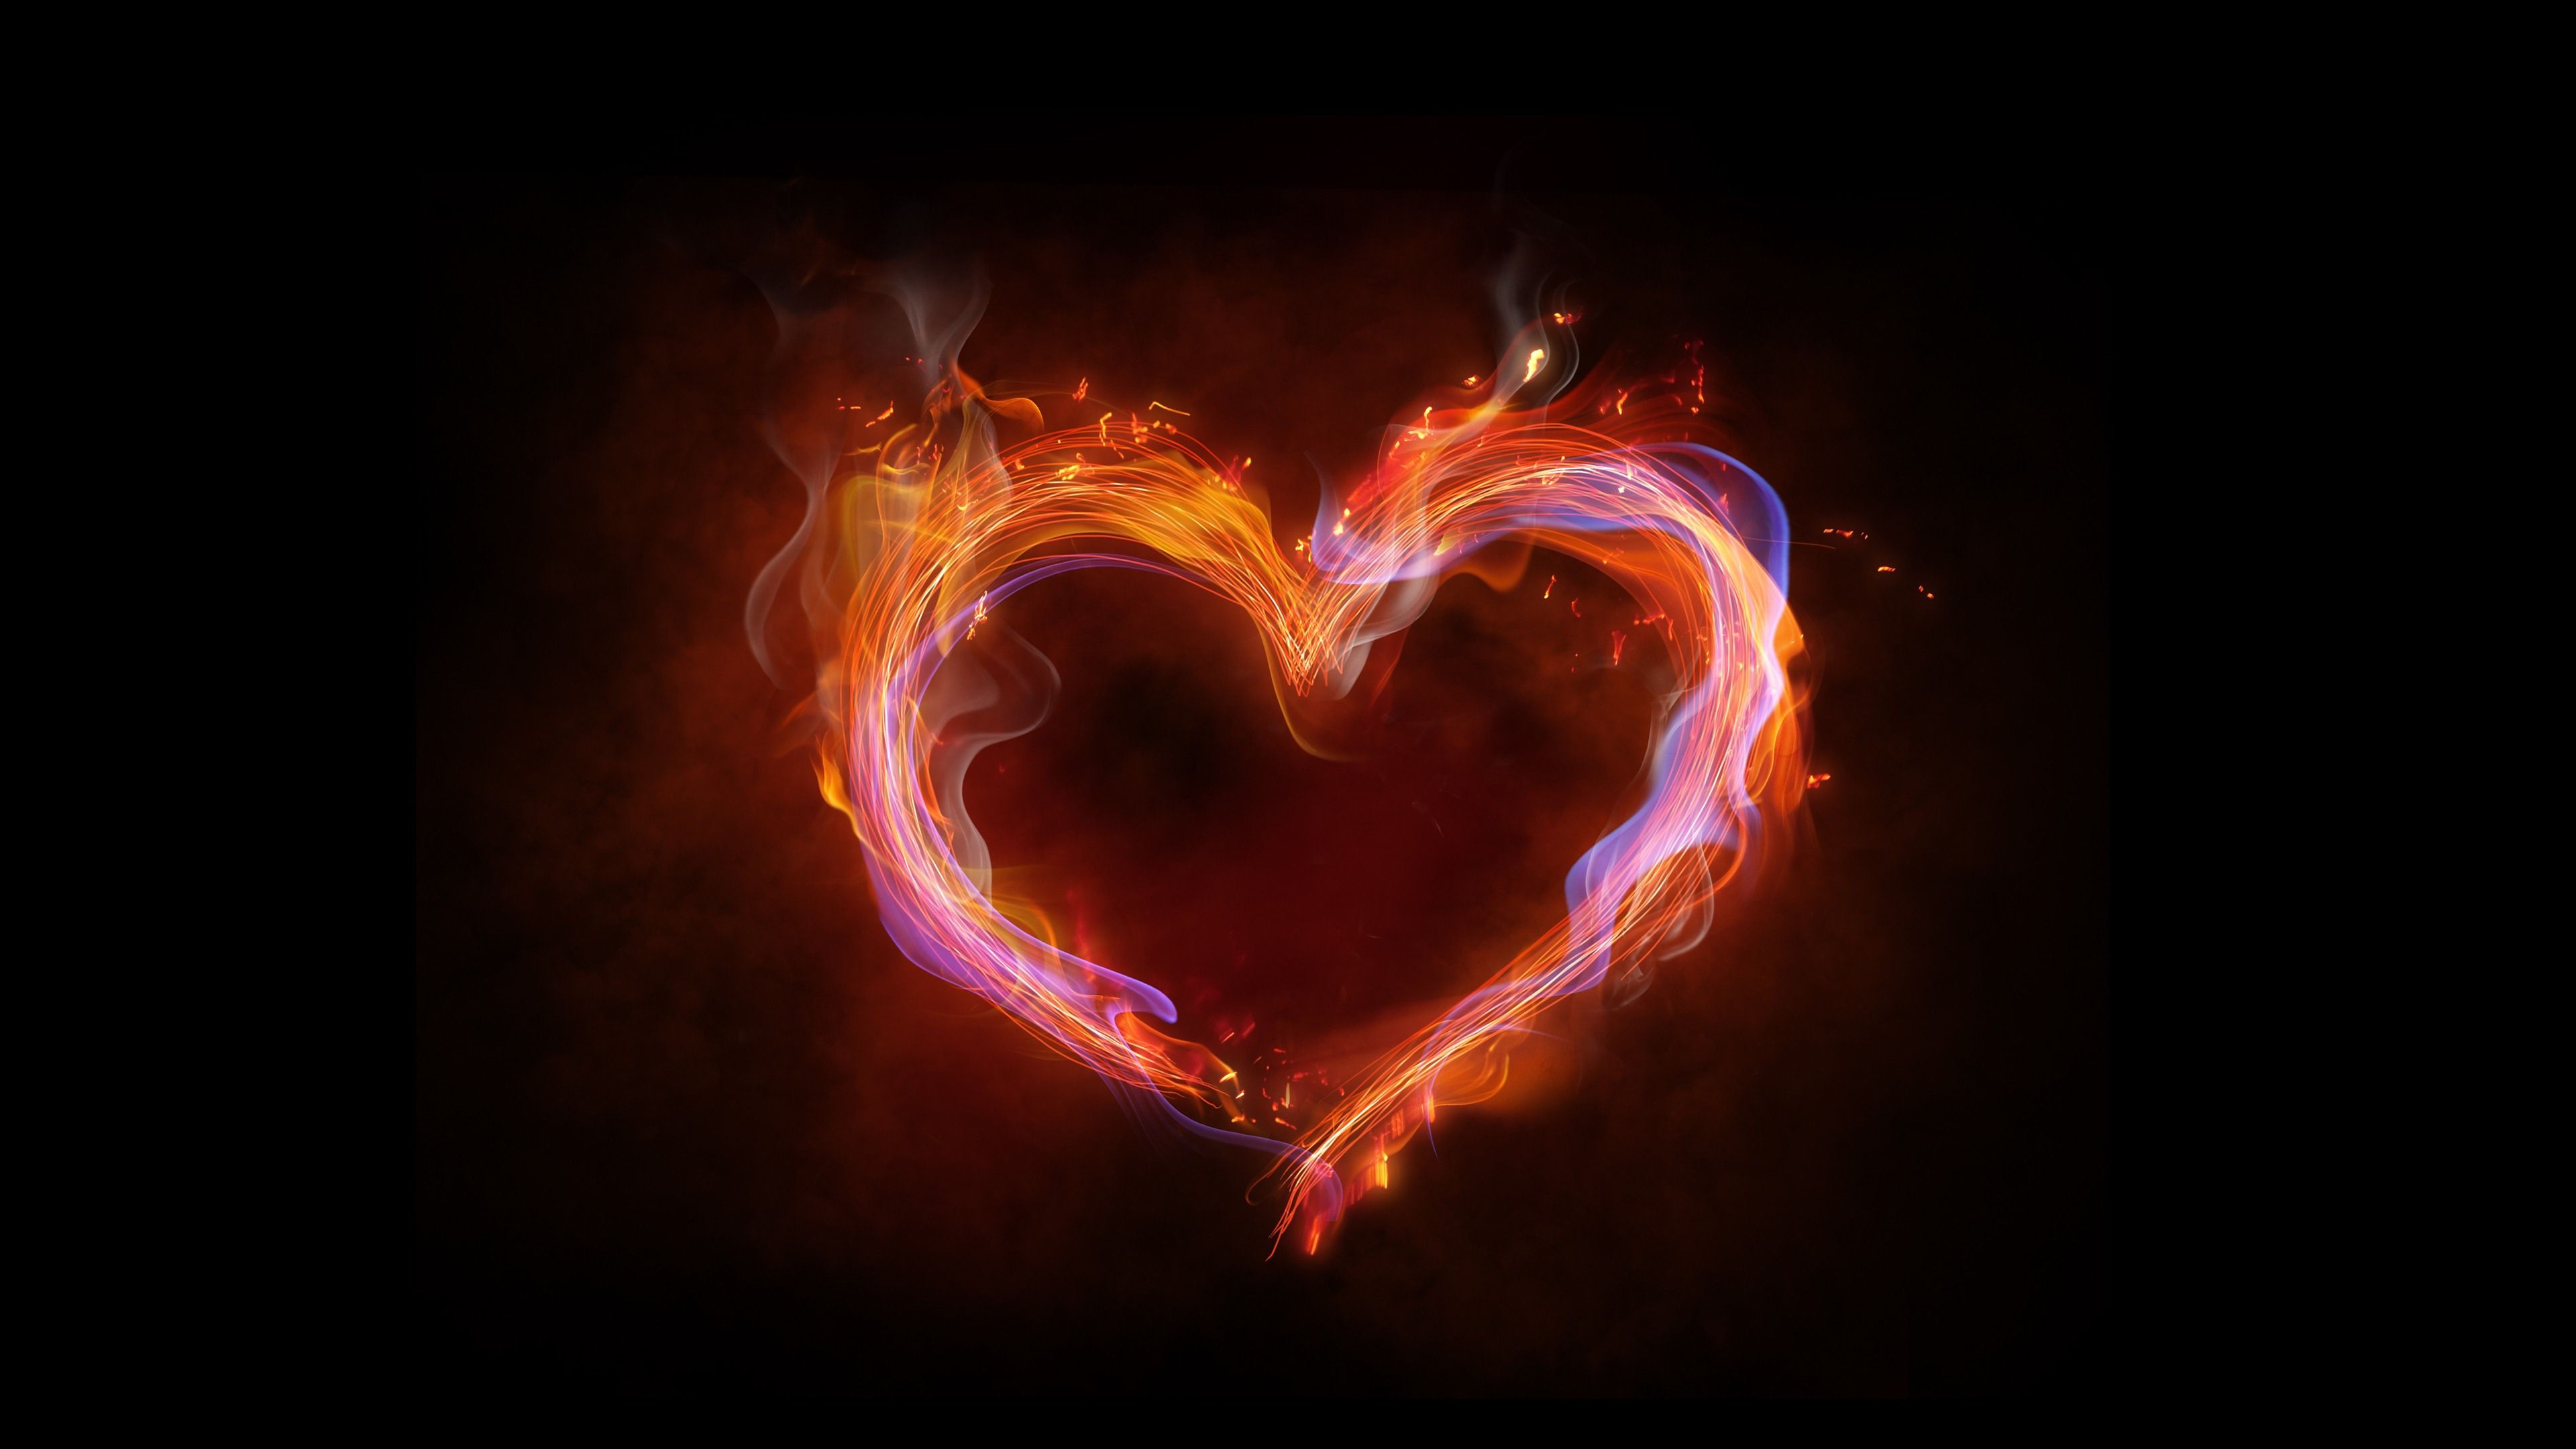 Flaming Heart Wallpapers 45608.